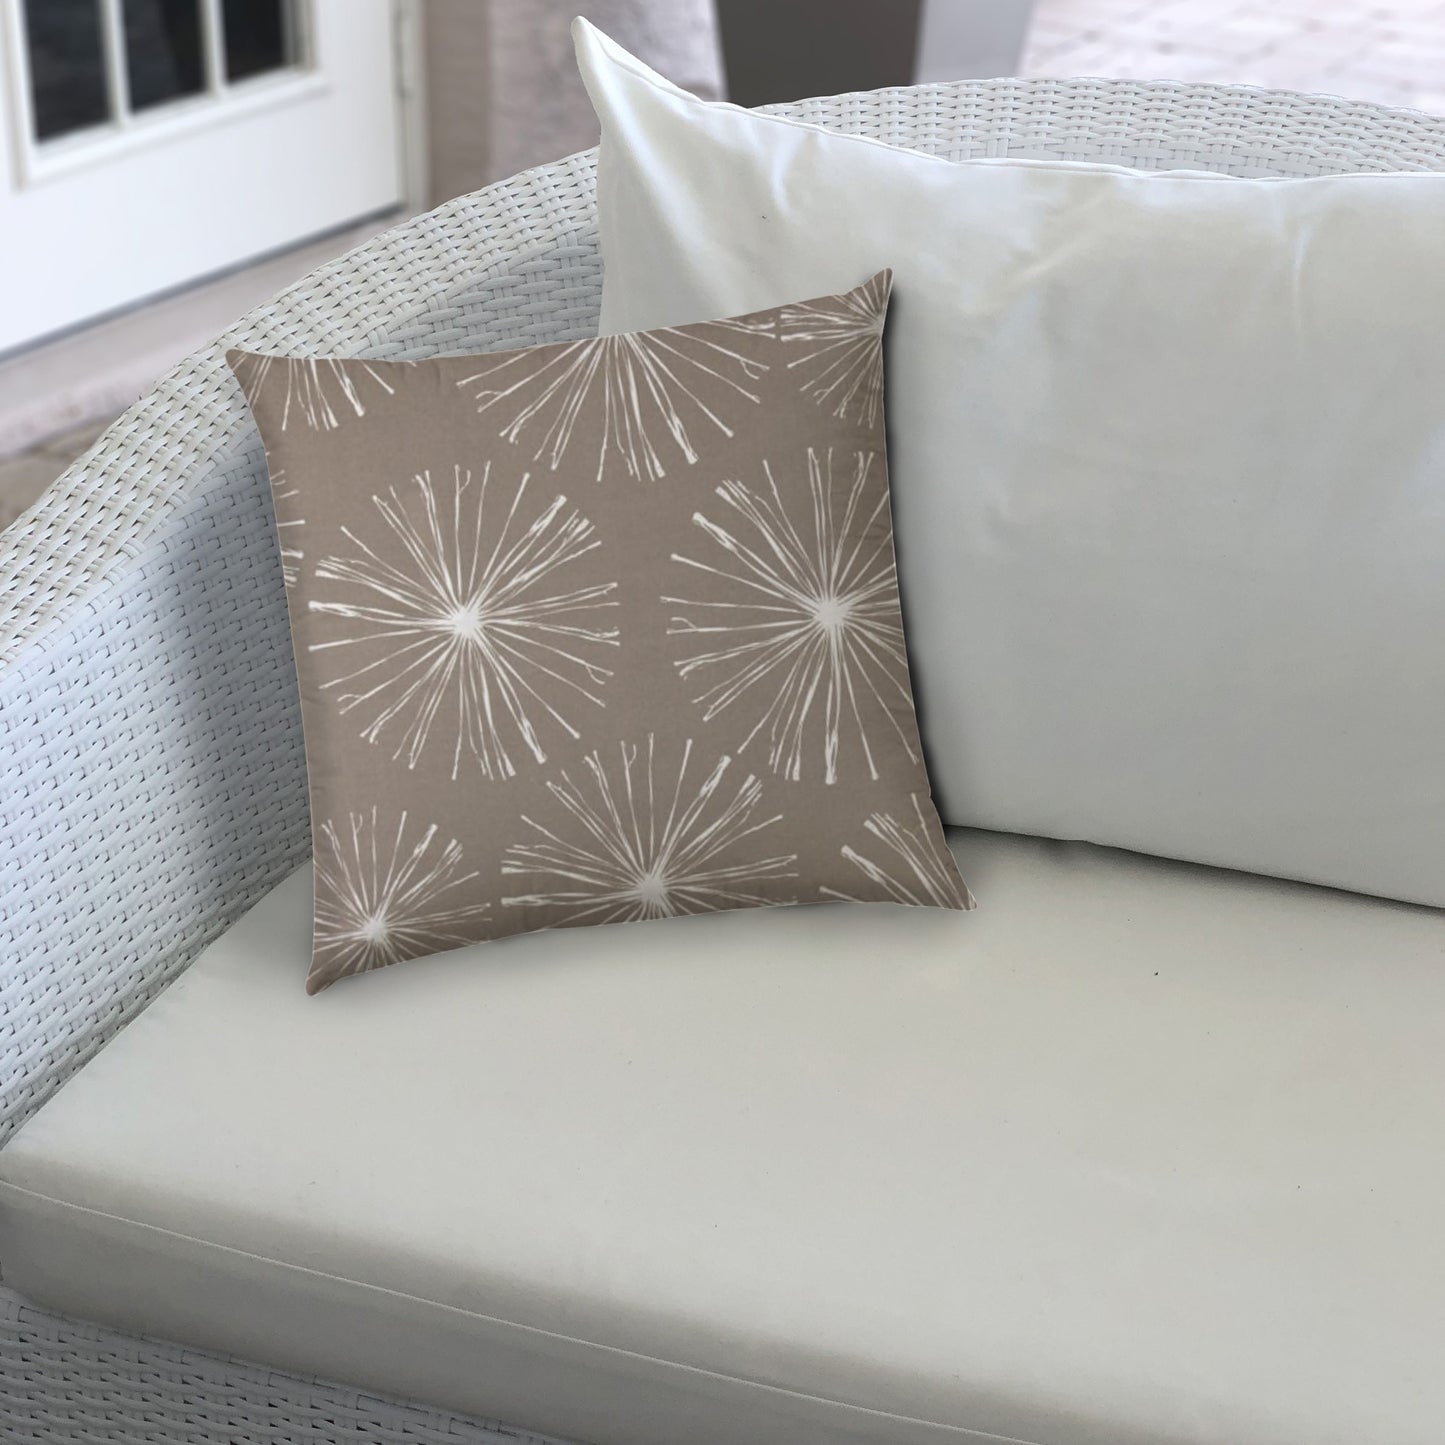 14" X 20" Taupe And White Blown Seam Floral Lumbar Indoor Outdoor Pillow